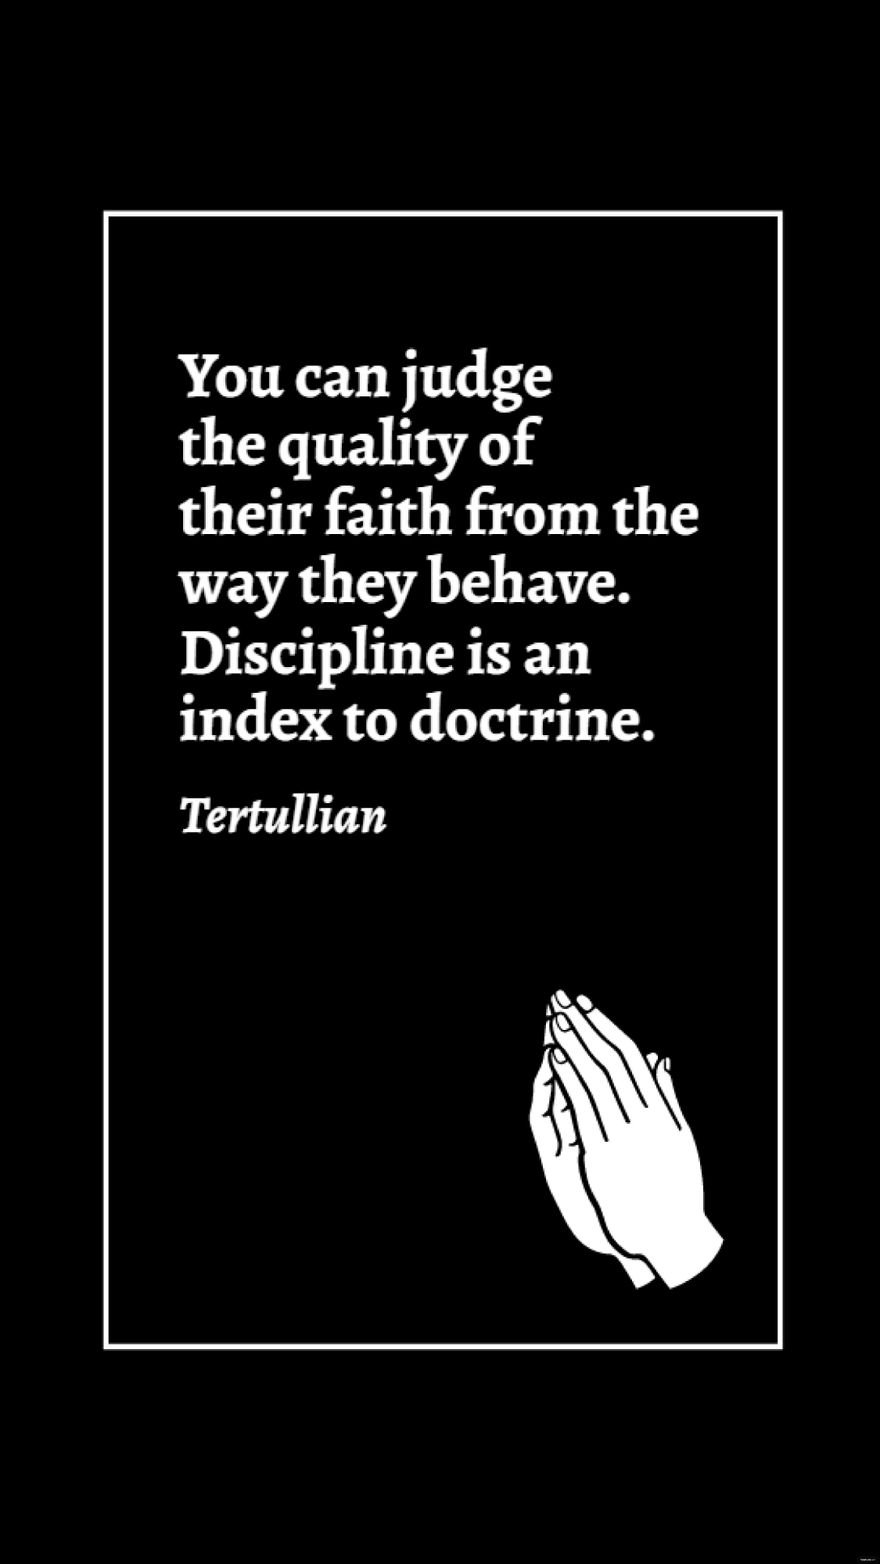 Free Tertullian - You can judge the quality of their faith from the way they behave. Discipline is an index to doctrine. in JPG